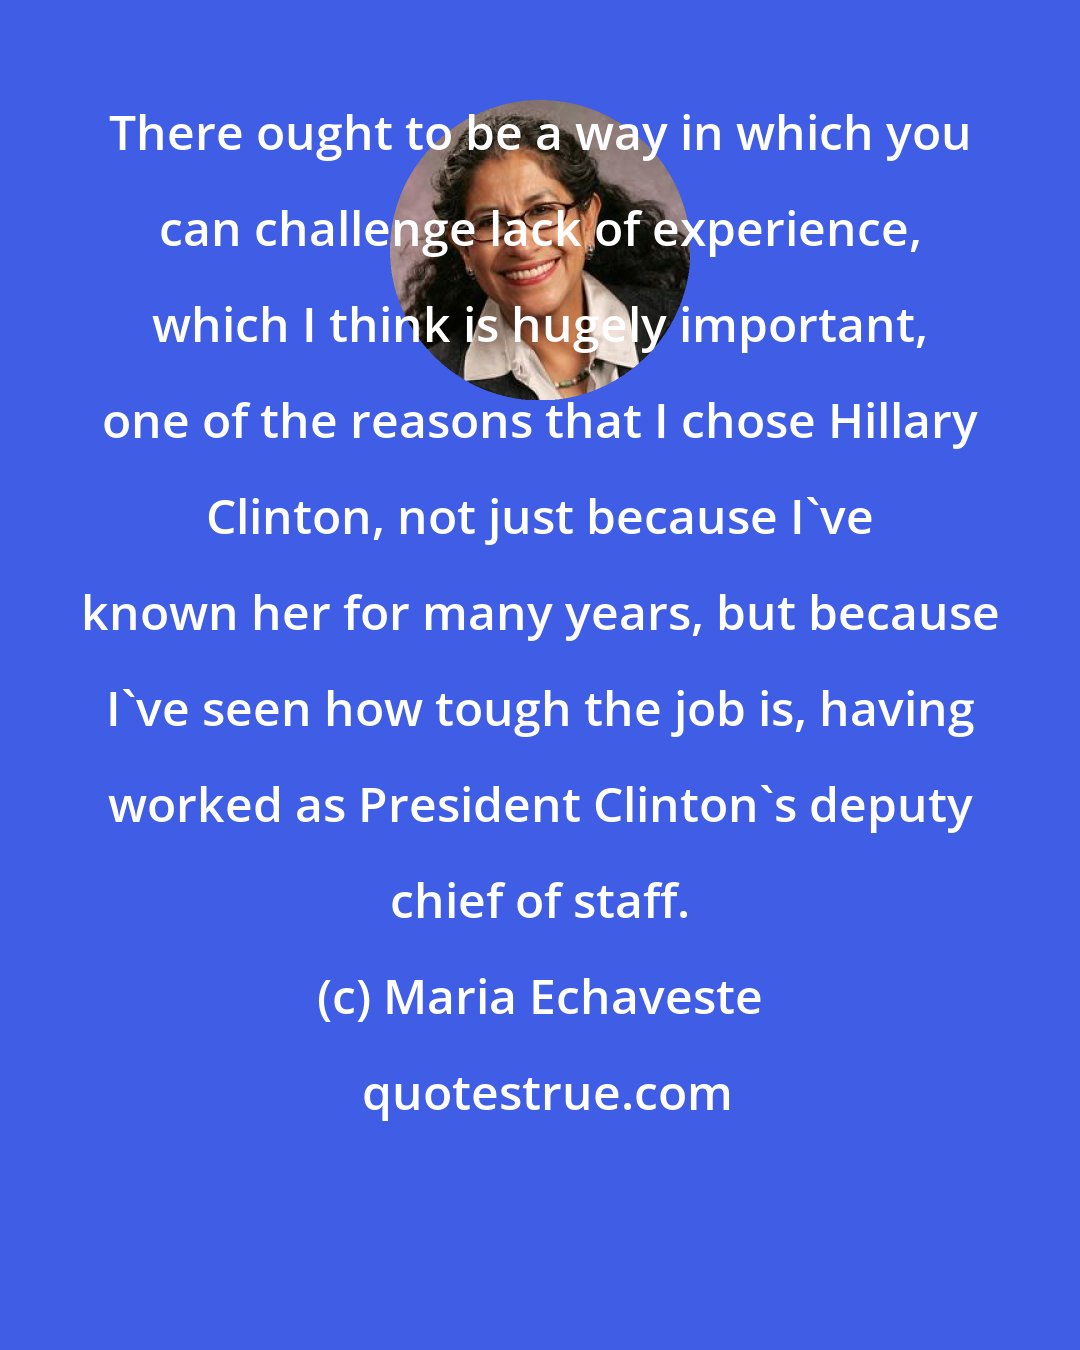 Maria Echaveste: There ought to be a way in which you can challenge lack of experience, which I think is hugely important, one of the reasons that I chose Hillary Clinton, not just because I've known her for many years, but because I've seen how tough the job is, having worked as President Clinton's deputy chief of staff.